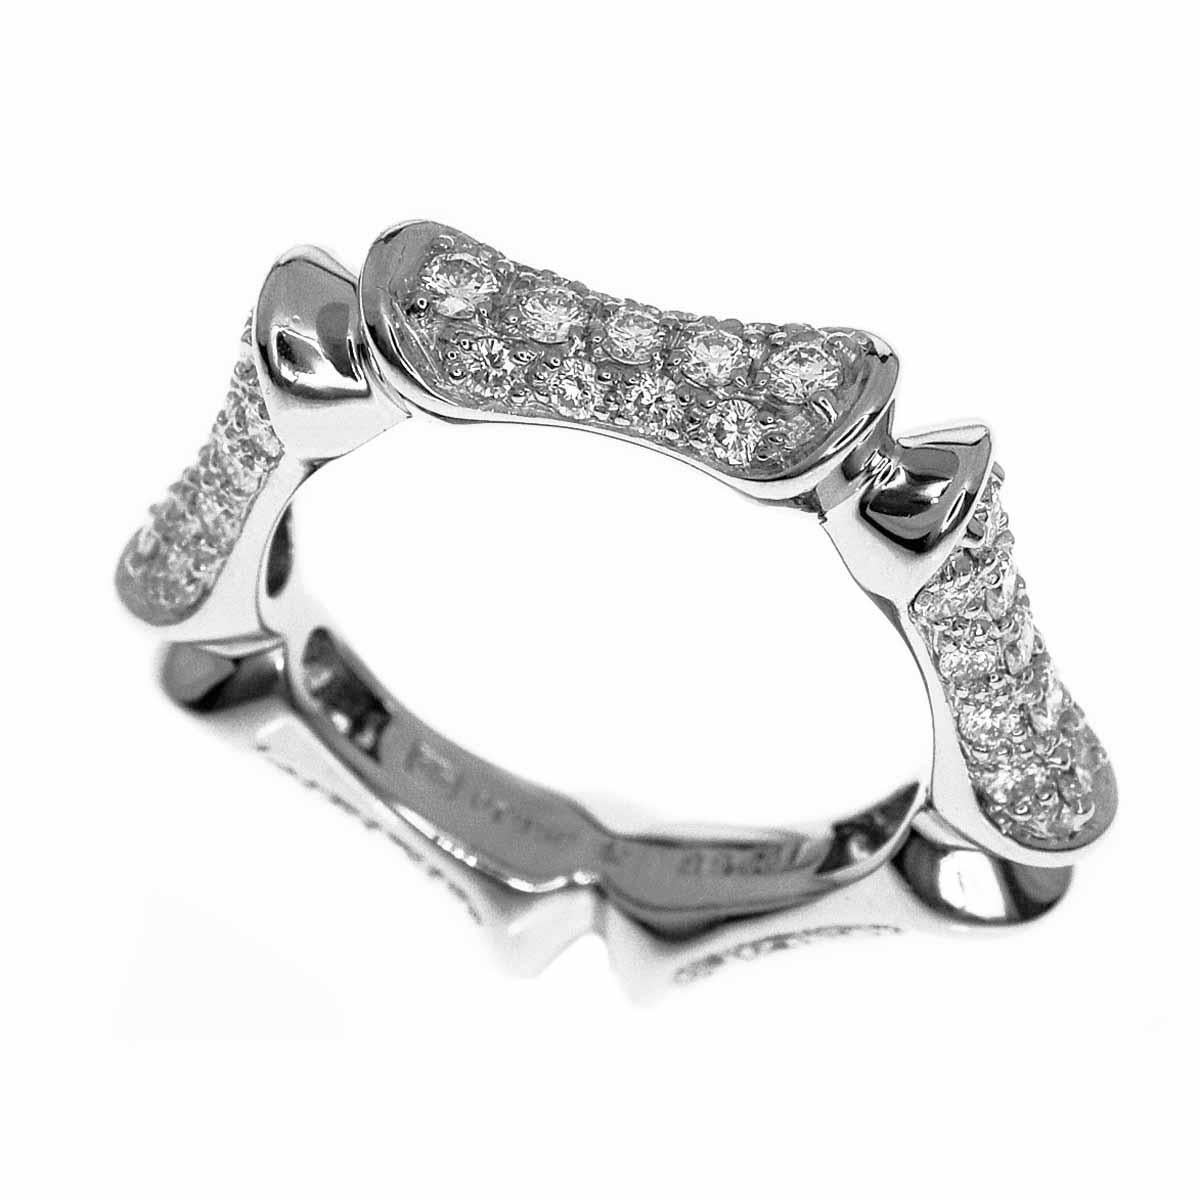 Brand:HARRY WINSTON
Name:Bamboo motif Band ring
Material :Diamond, PT950 platinum
Comes with:Harry Winston Case,HW repair receipt (July 2018)
Ring size:British & Australian:L 1/4  /   US & Canada:5.75 /  French & Russian:51 /  German:16.2 / 